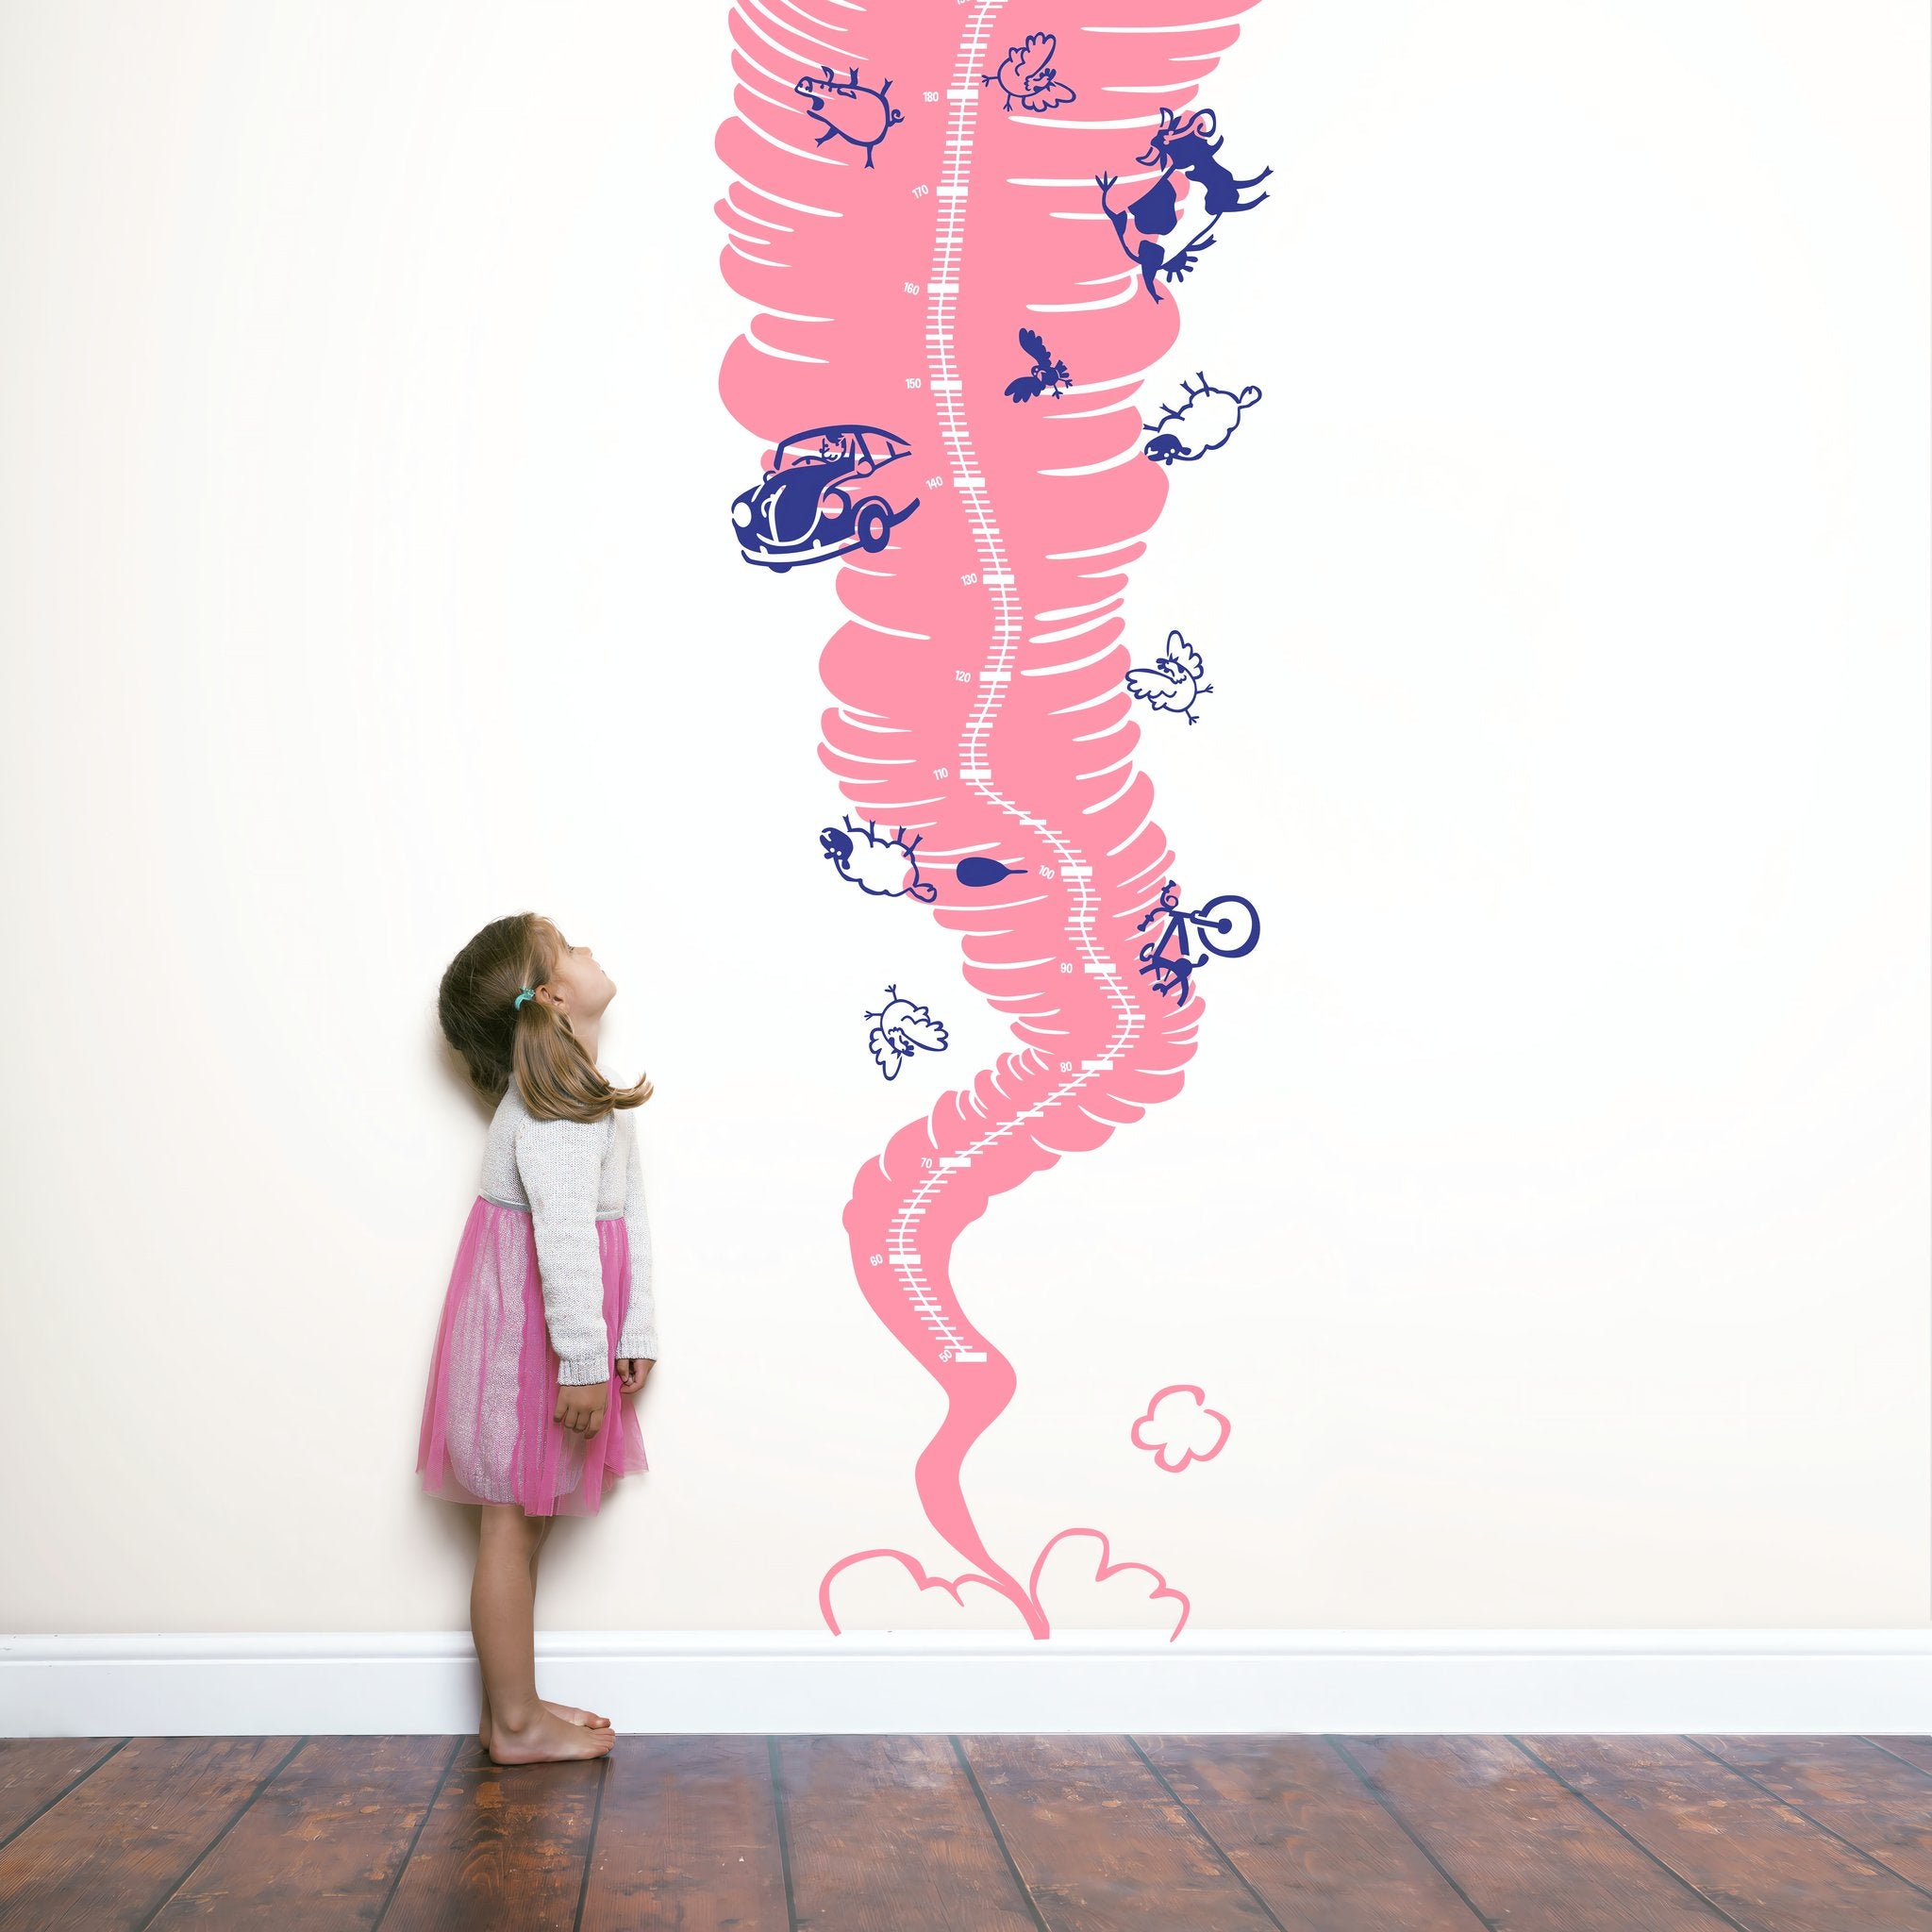 Height chart sticker of a tornado with a young girl nearby.